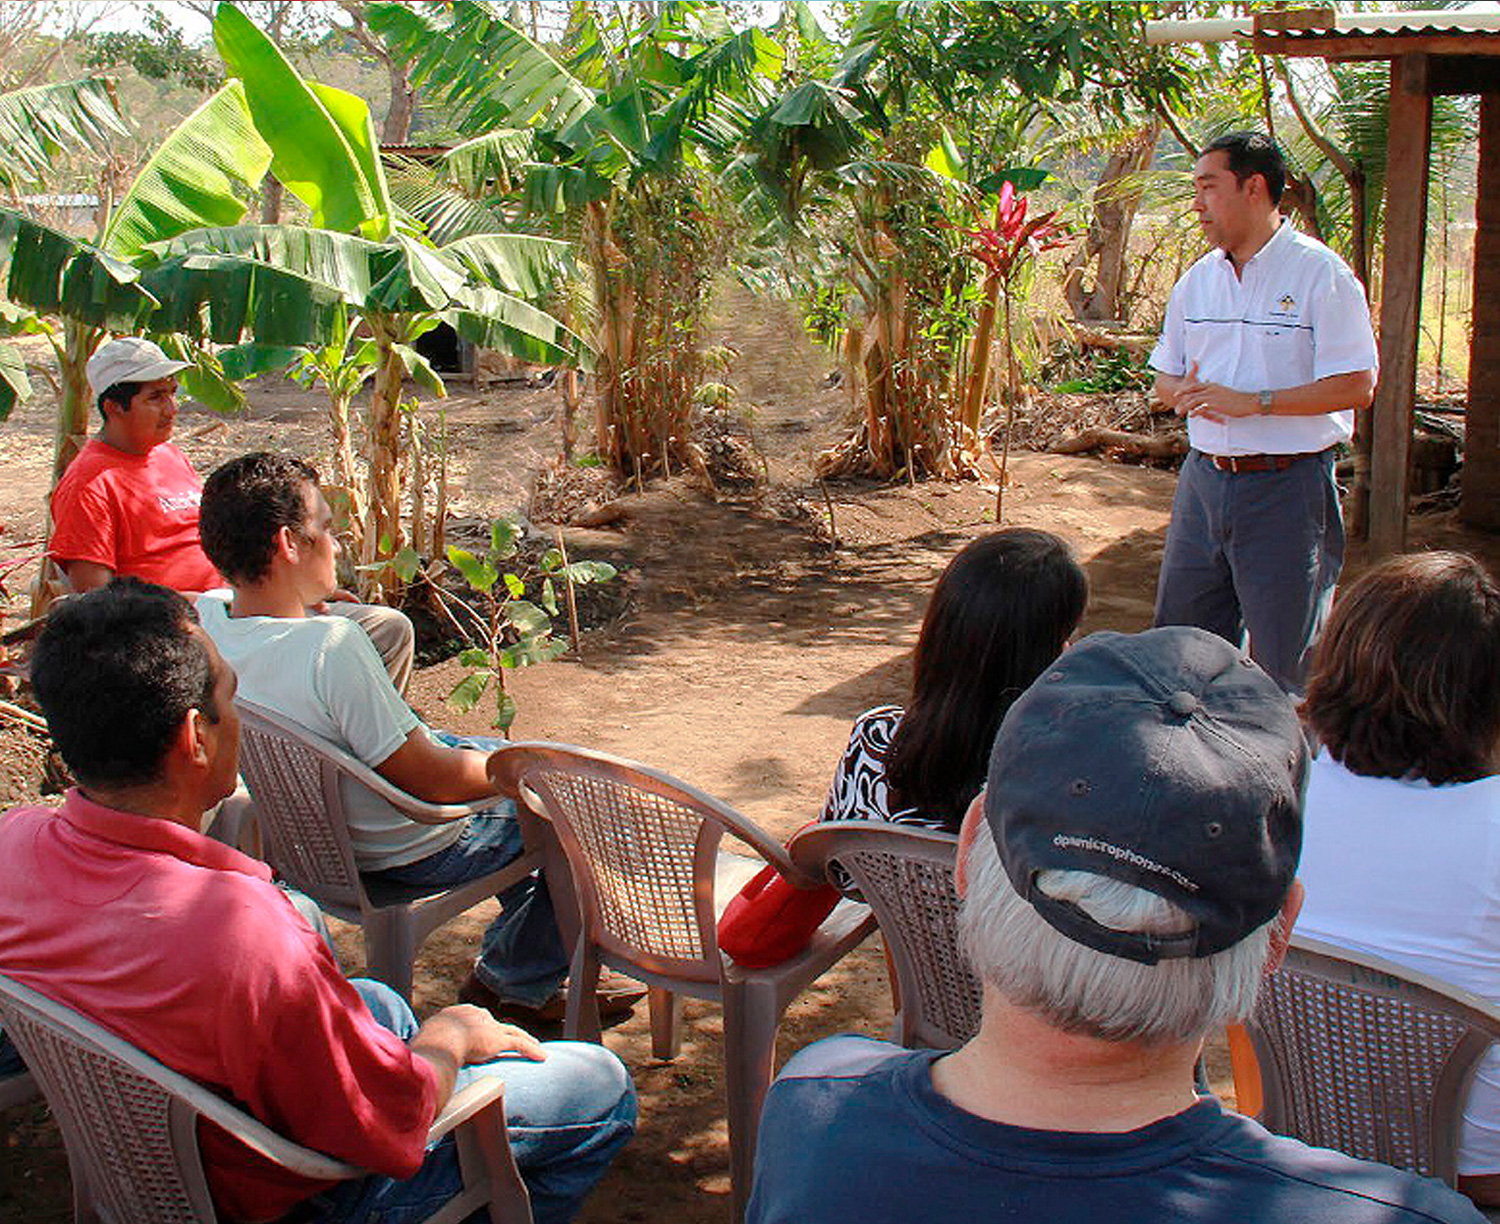 A standing Latin American man delivers a talk on reading the environment to seated participants at a farm site.